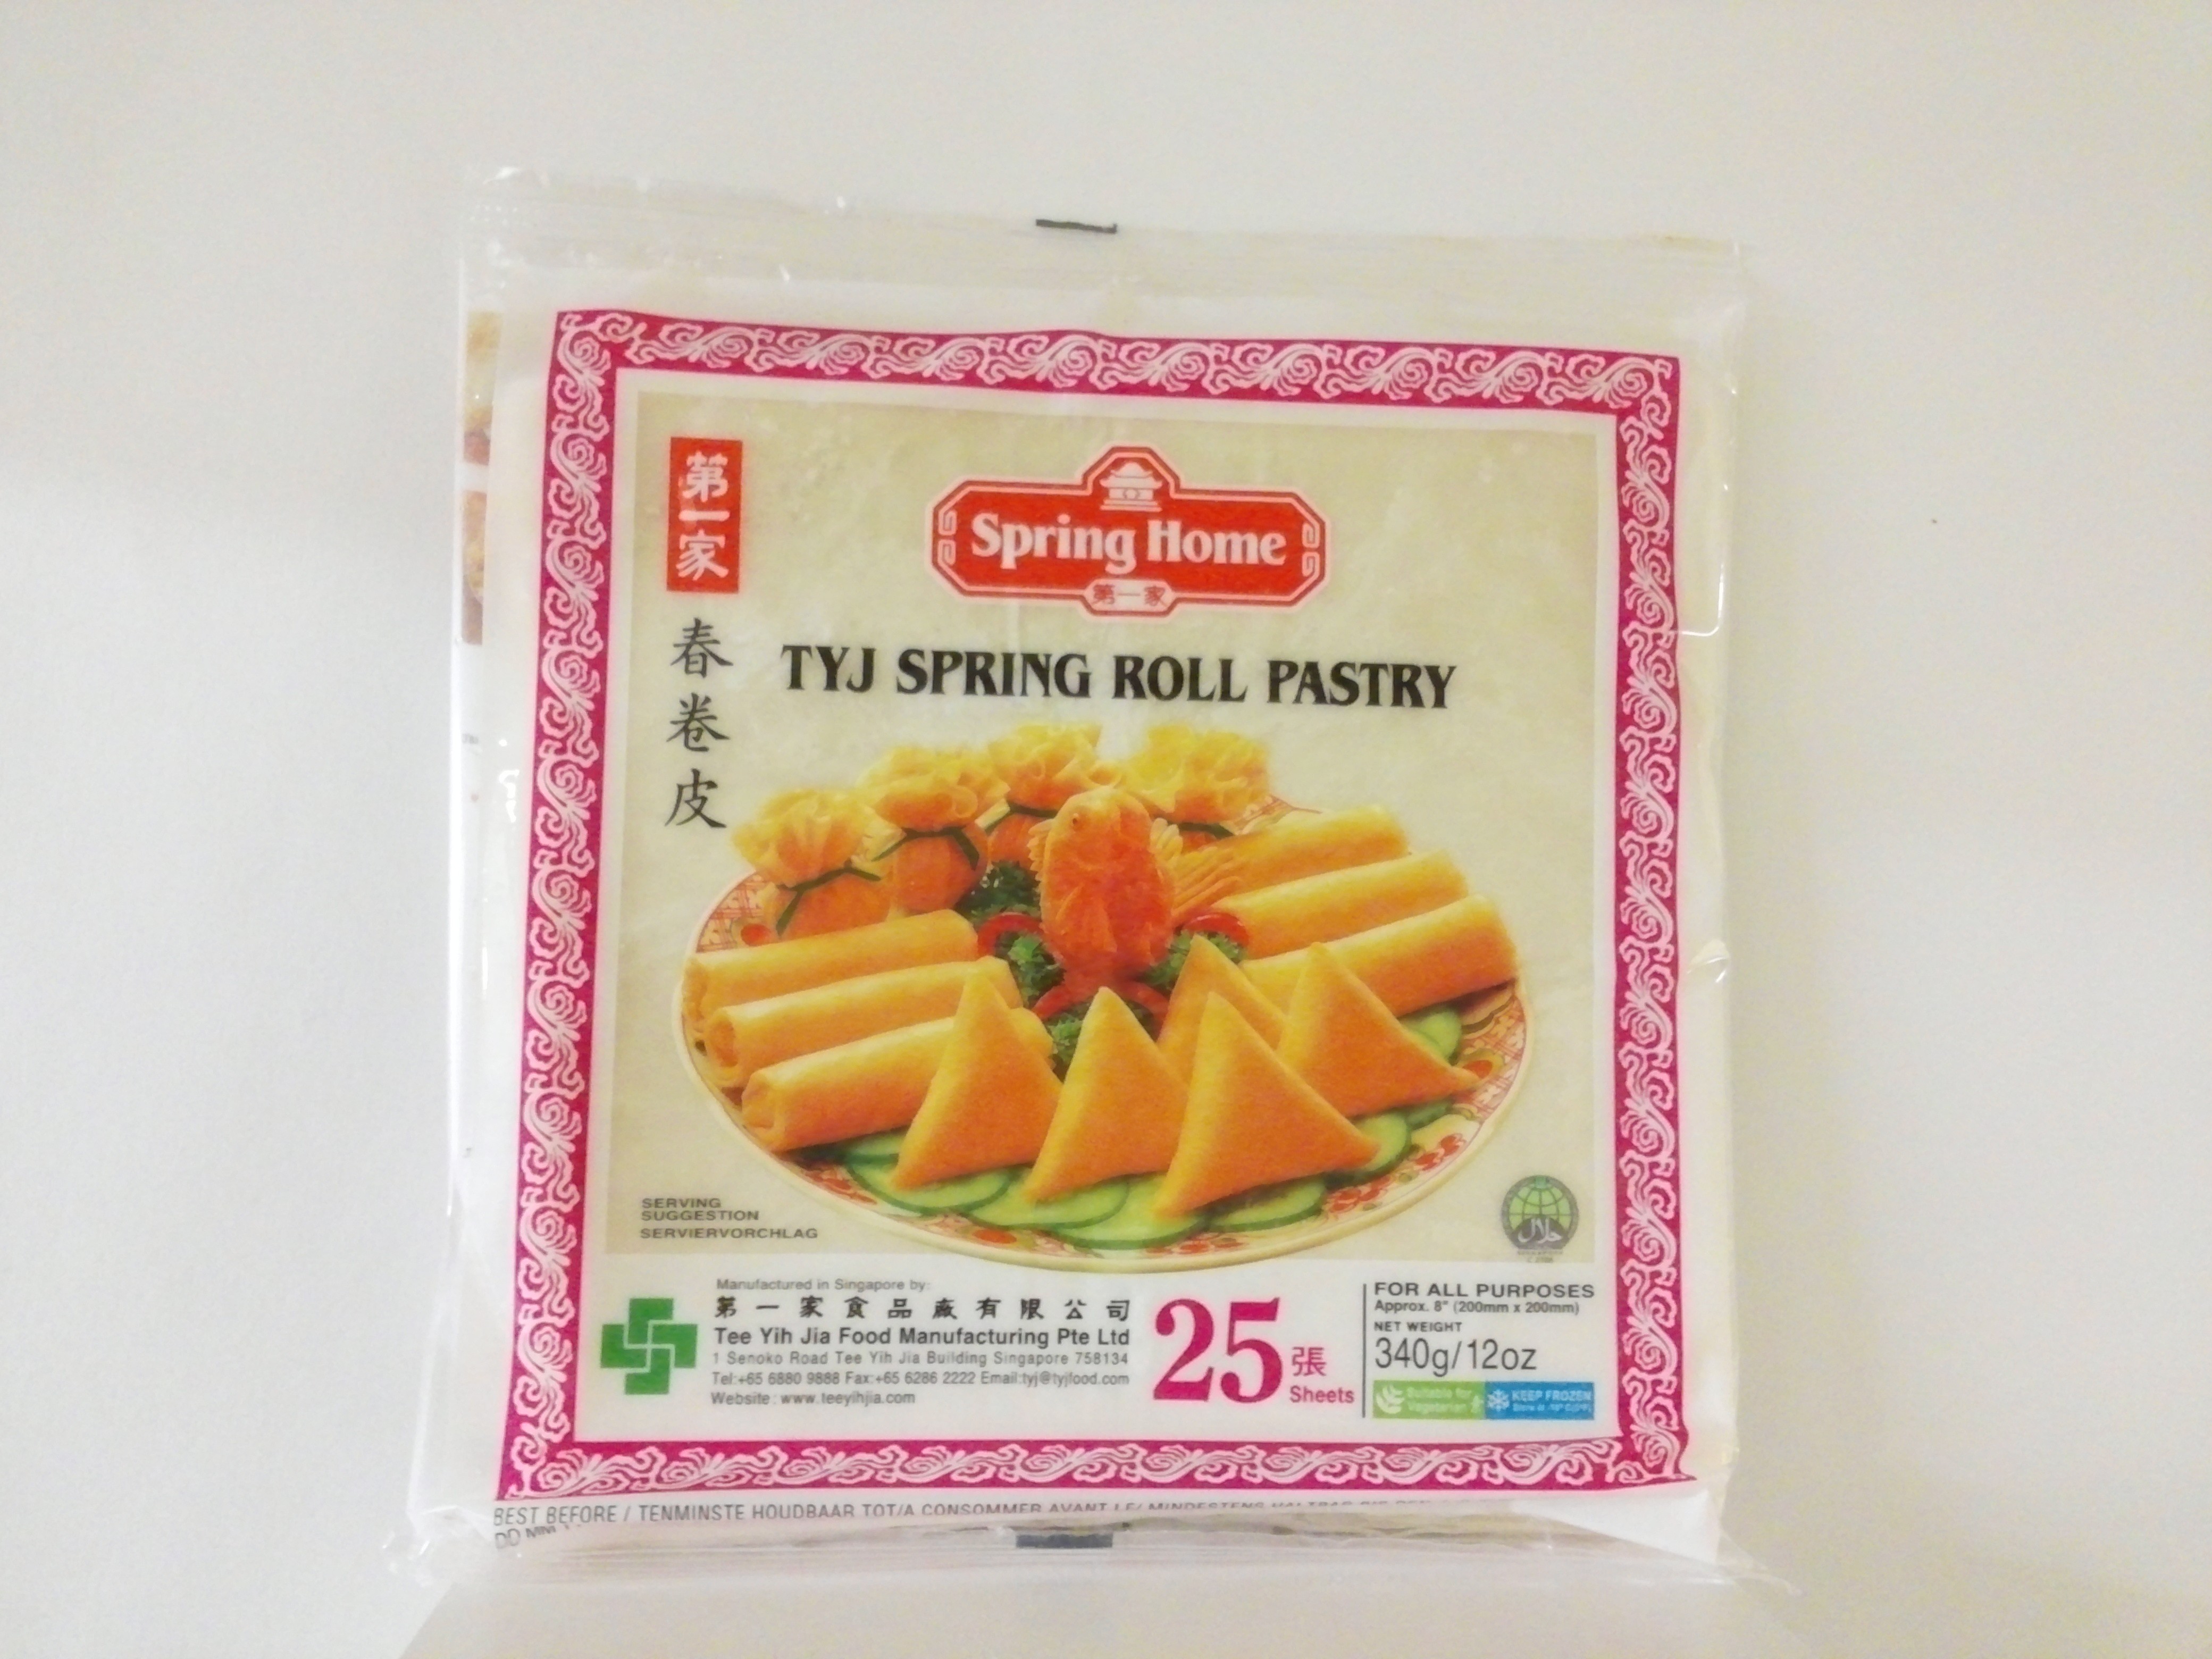 TYJ Spring Roll Pastry 25 sheets 12 oz